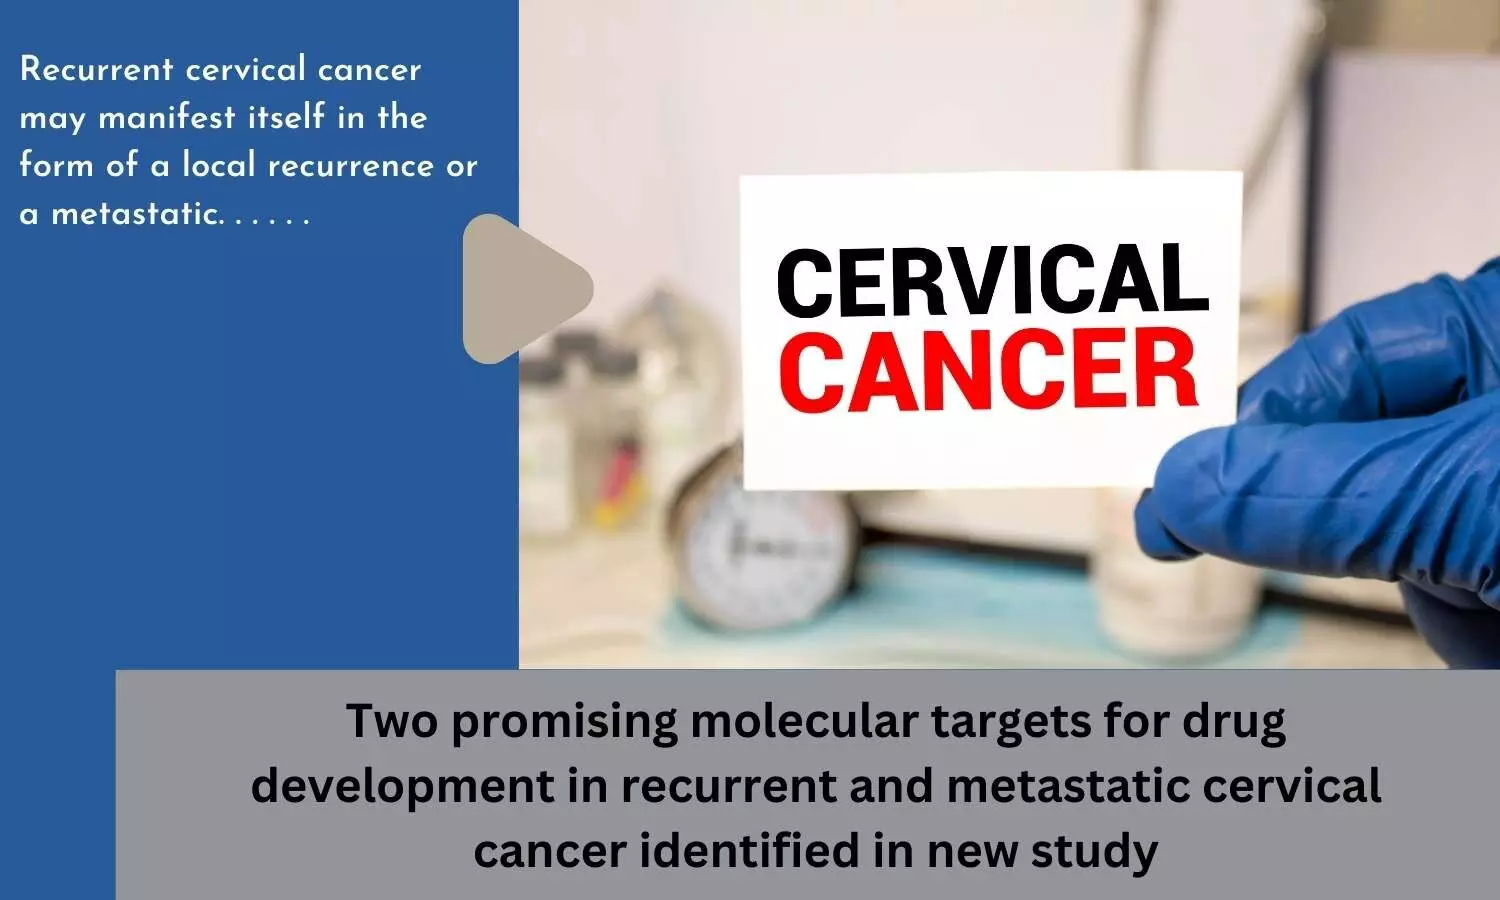 Two promising molecular targets for drug development in recurrent and metastatic cervical cancer identified in new study